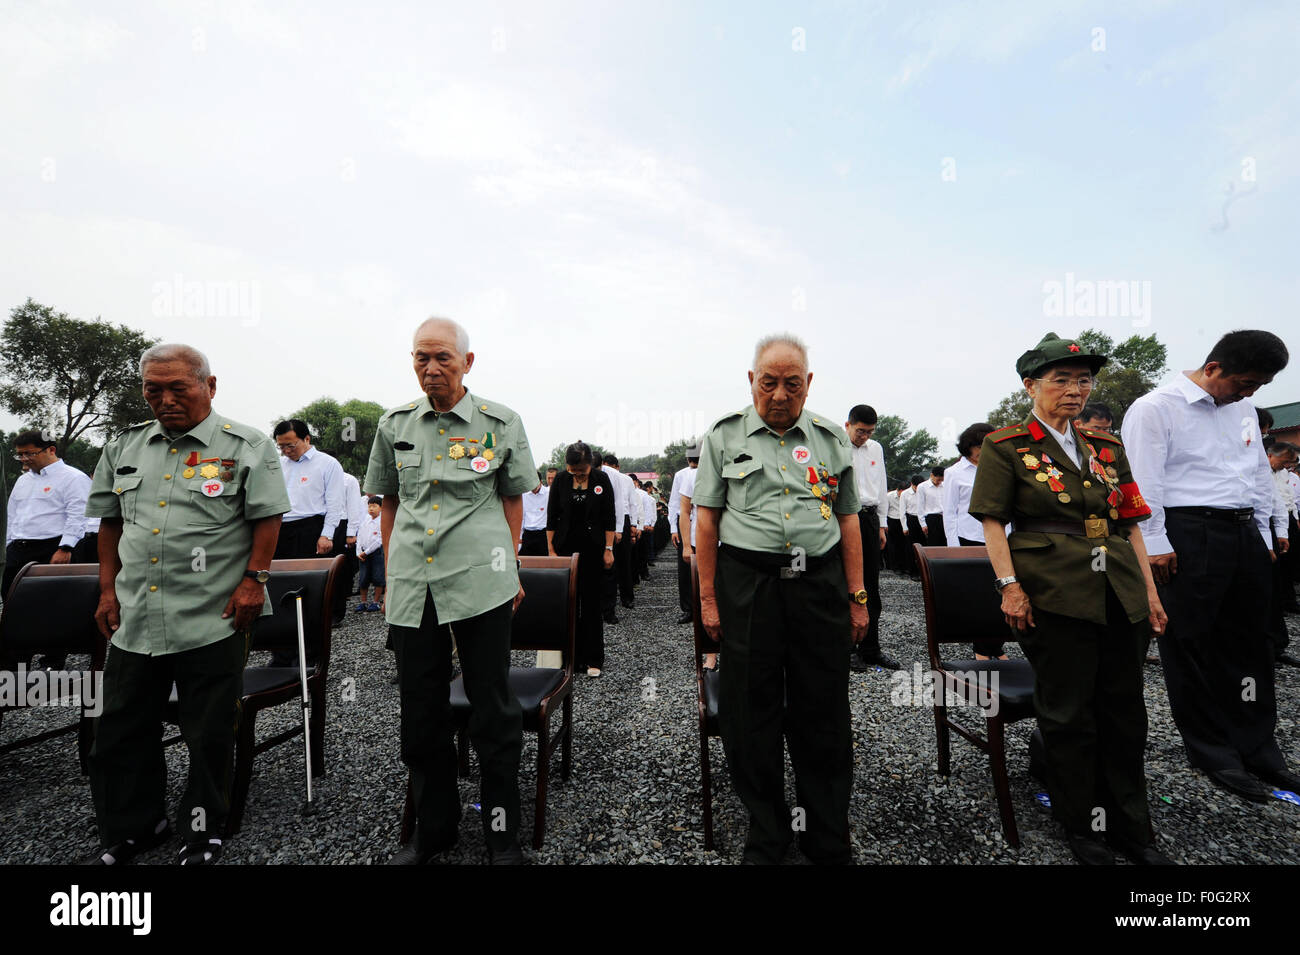 Chinese veterans stand in silent tribute during the opening ceremony of a museum about Japanese army Unit 731 wartime atrocities in Harbin, capital of northeast China's Heilongjiang Province, Aug. 15, 2015. The Museum of Evidence of War Crimes by Japanese Army Unit 731, located on the site of former headquarters of Japanese army unit 731 in Harbin, opened on Saturday. Unit 731 was a biological and chemical warfare research base established in 1935. Stock Photo